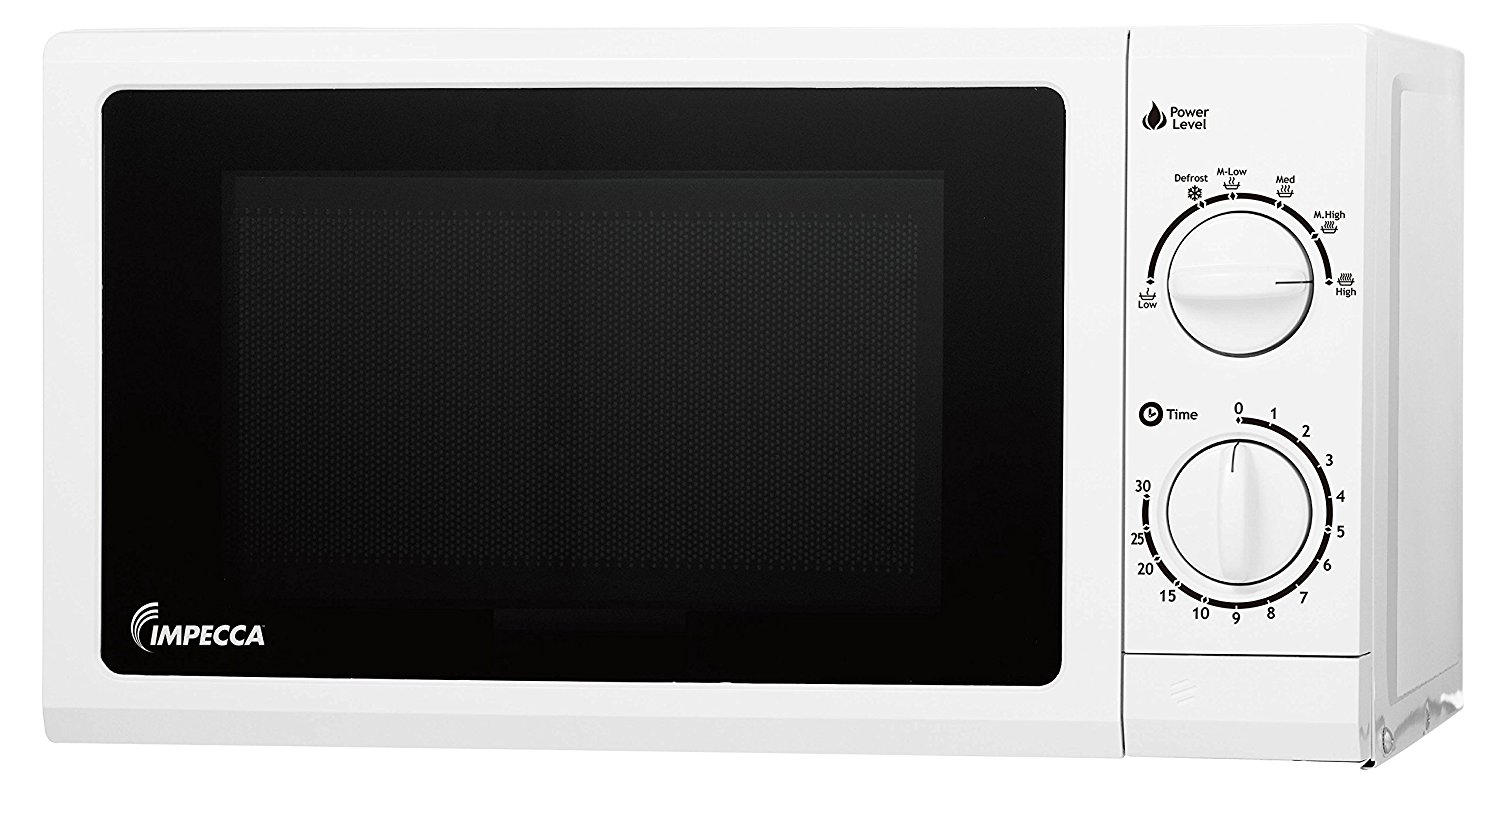 Impecca 700 Watts Lightweight Microwave Oven -120v 0.6 Cubic Feet Countertop Microwave Oven, White Digital Microwave (White)